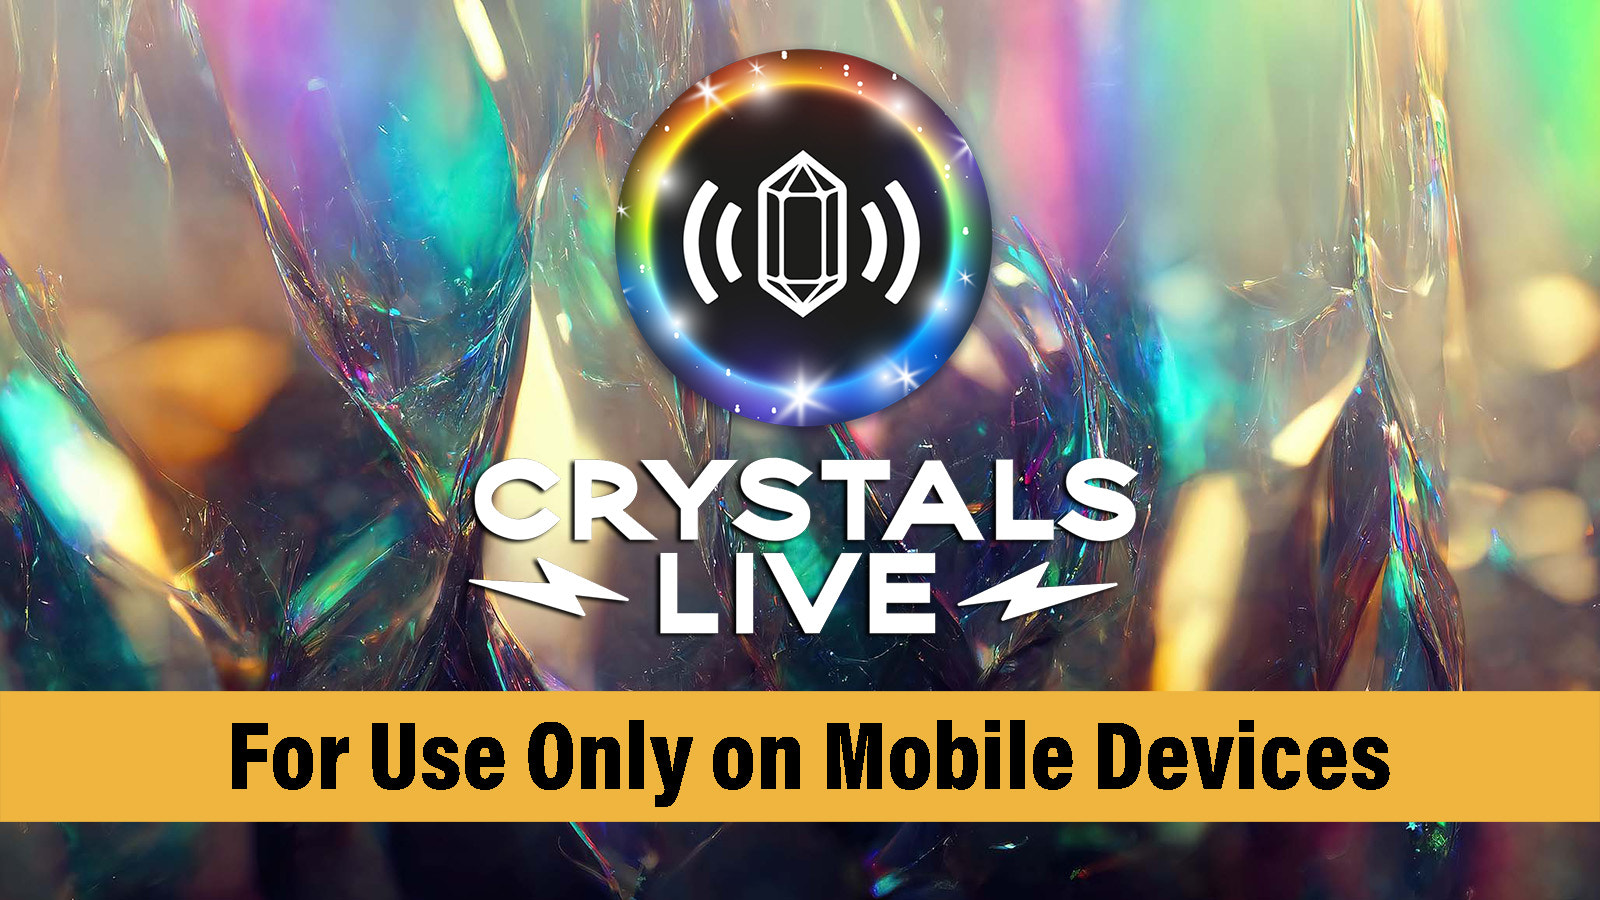 Crystals Live is a Mobile Only App